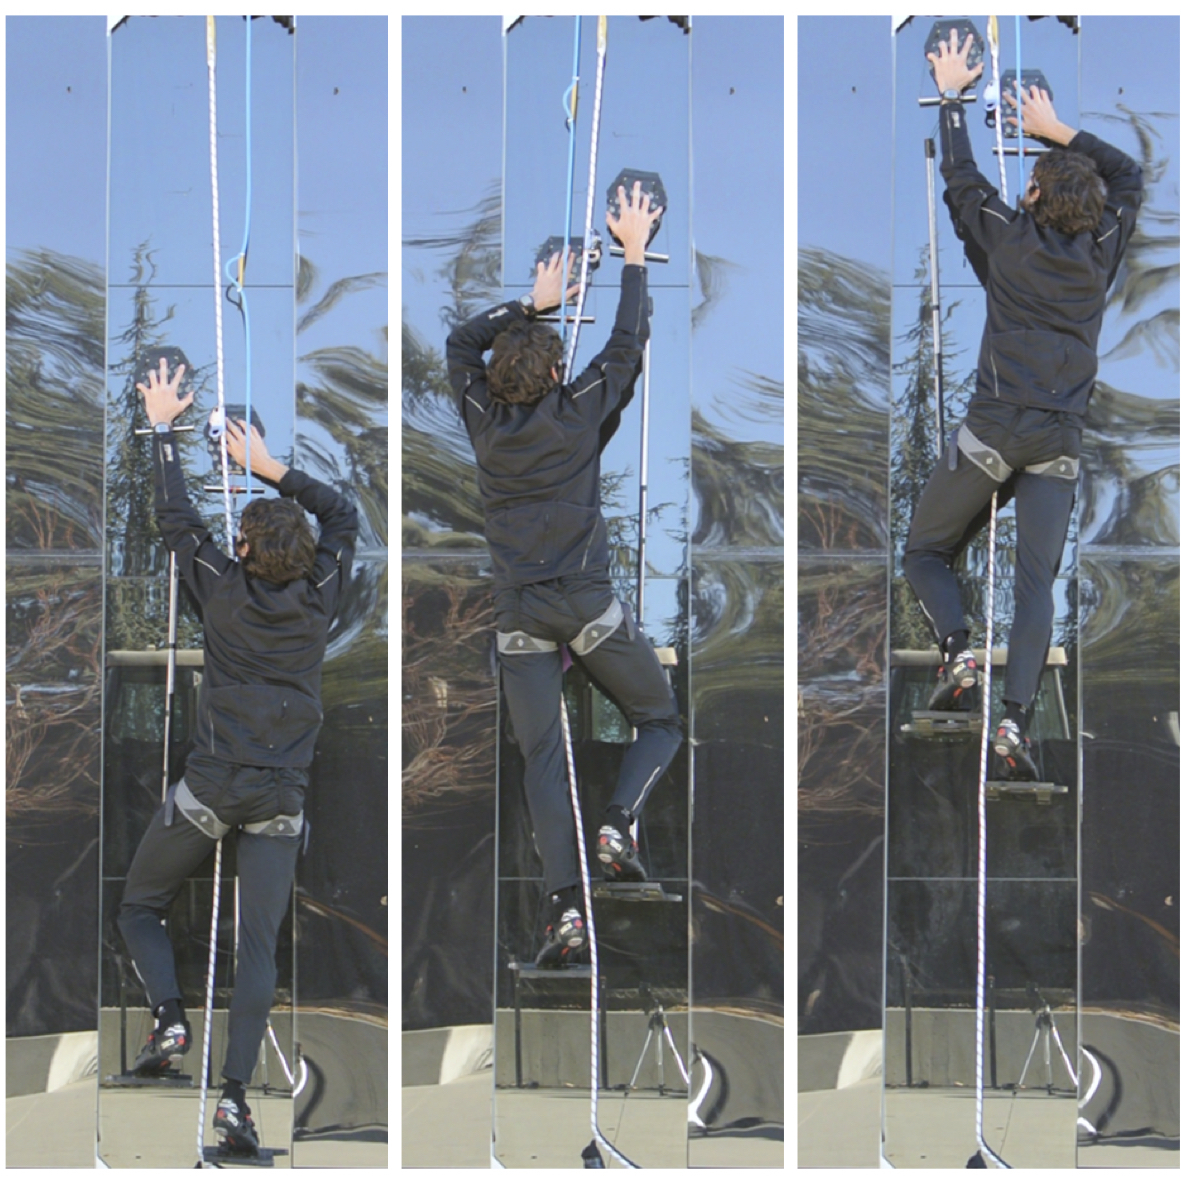 Stanford engineers climb walls using gecko-inspired climbing device...